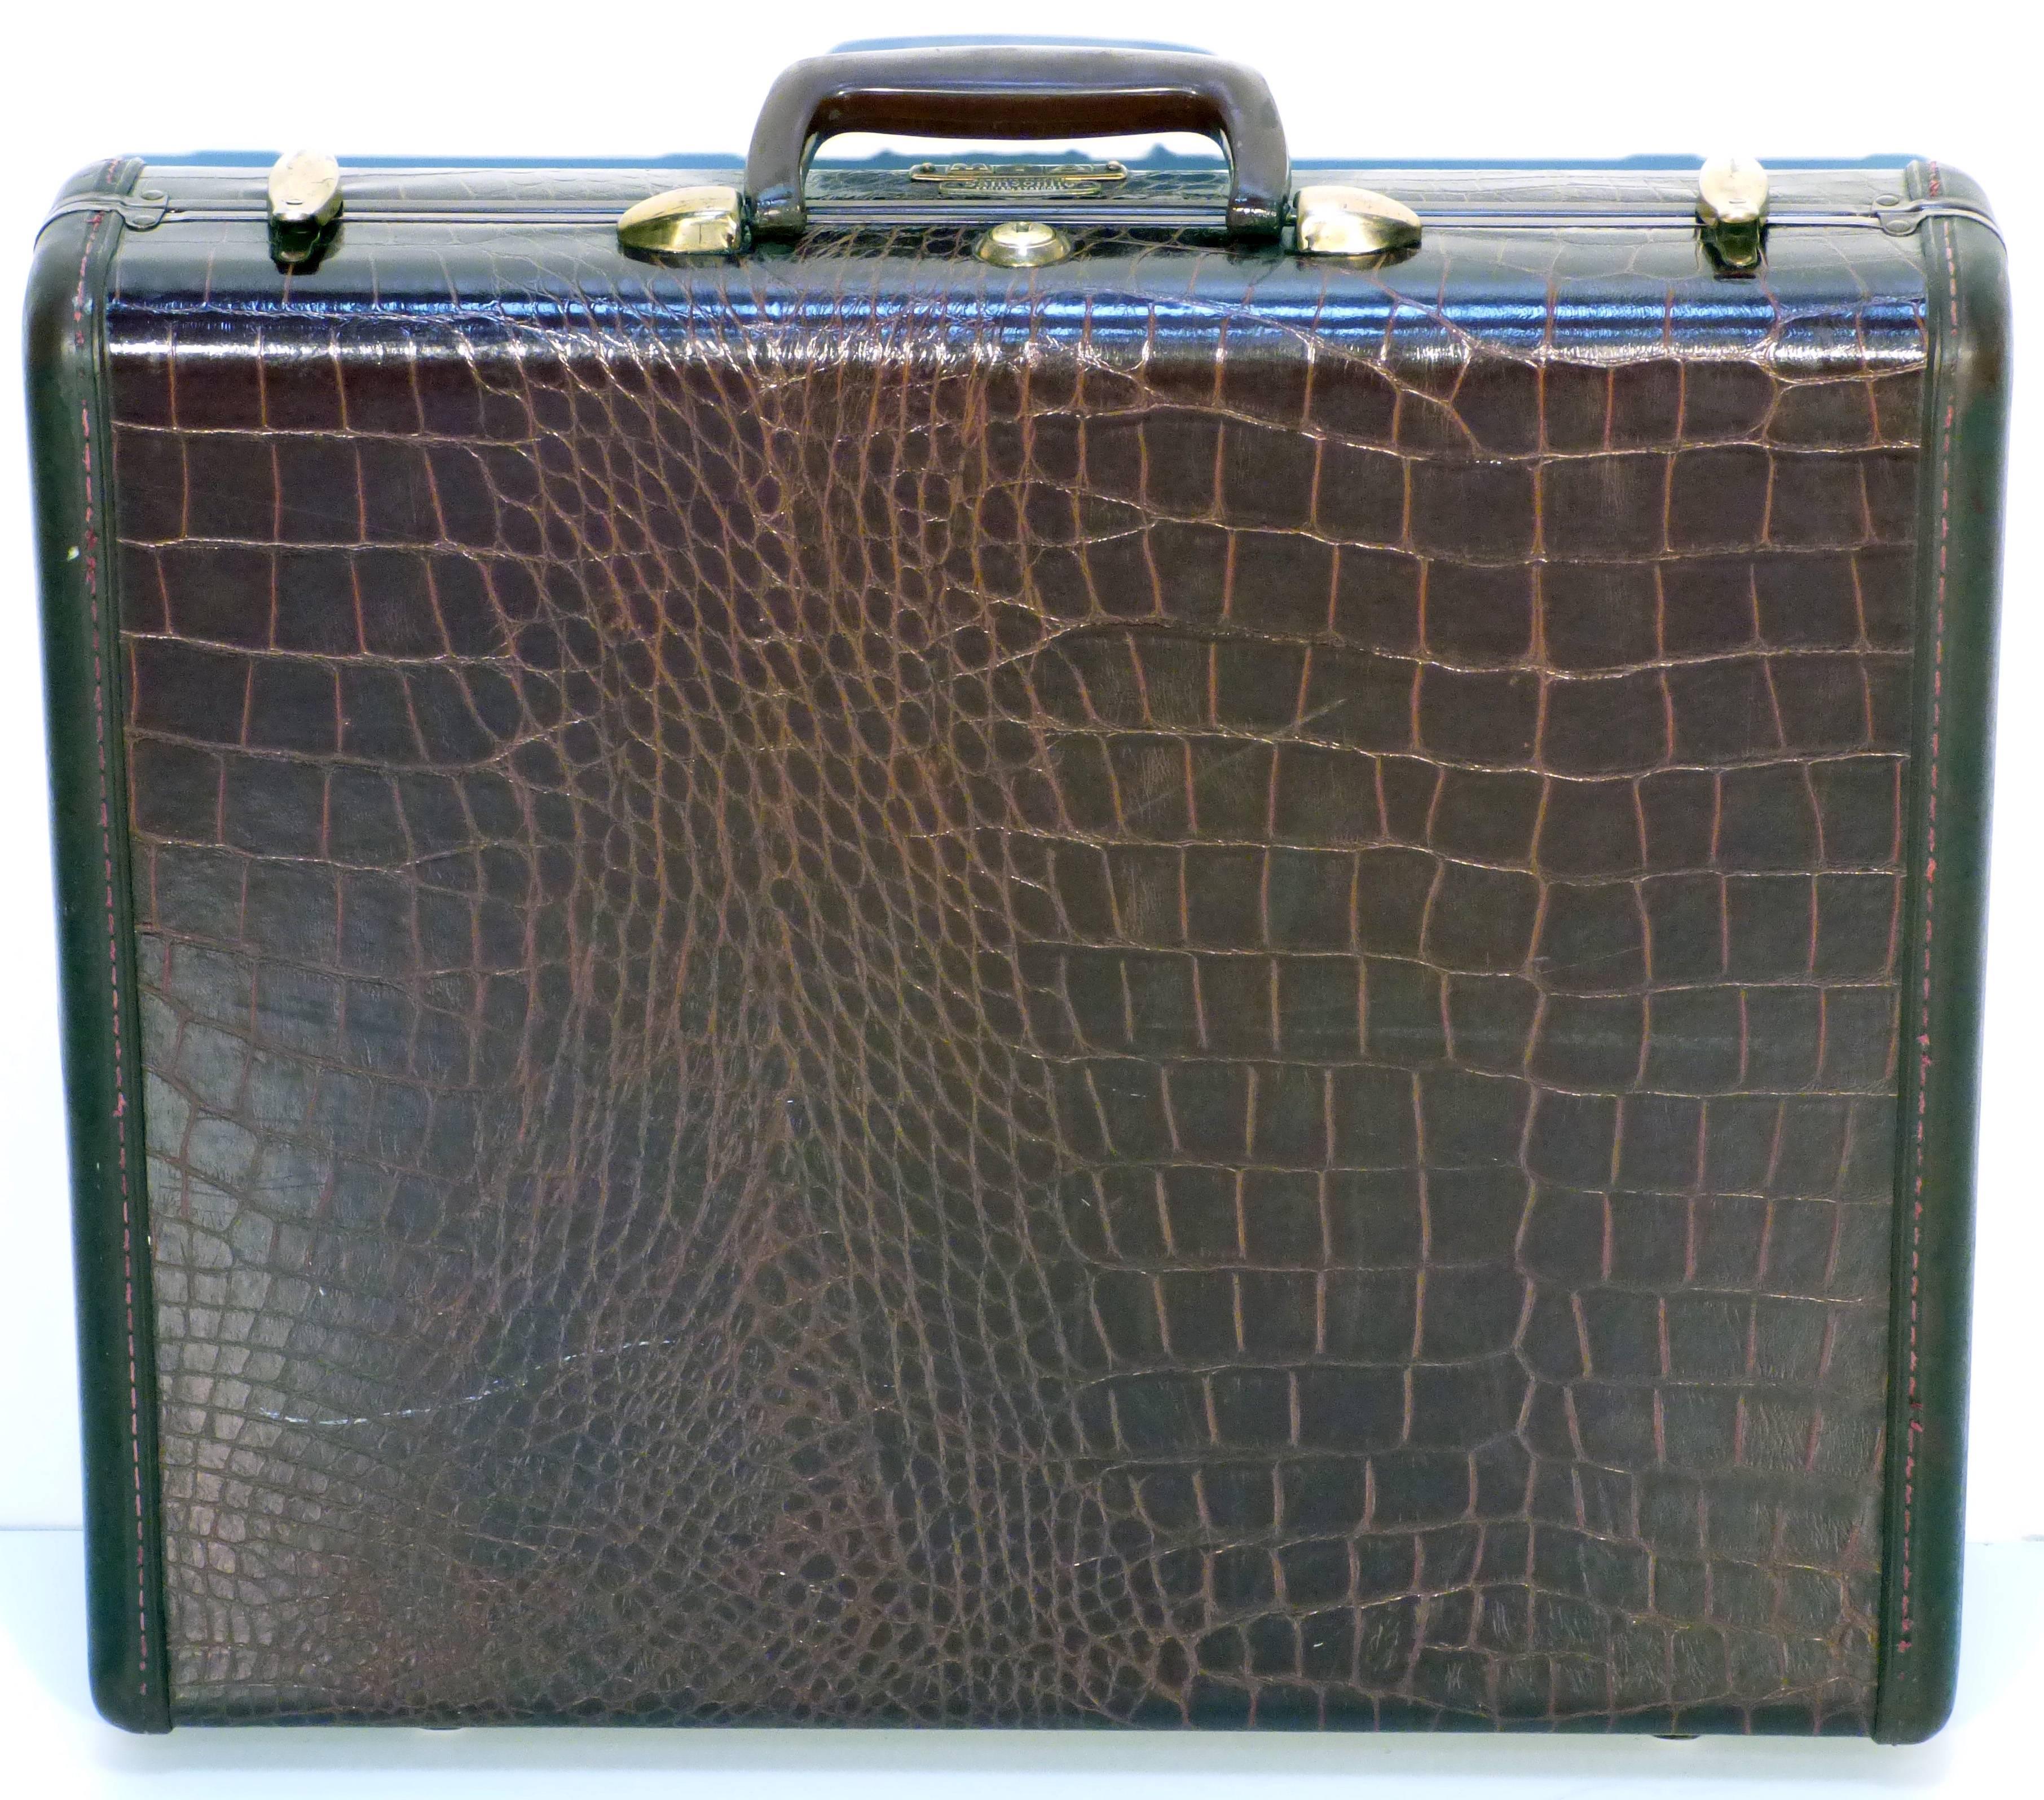 Leather suitcase in embossed-crocodile leather with brass appointments. Clean interior and barley used. 
We have more Samsonite suitcases in our storefront and we'll upload more soon.

For shipping costs, just send us a short message & we'll make